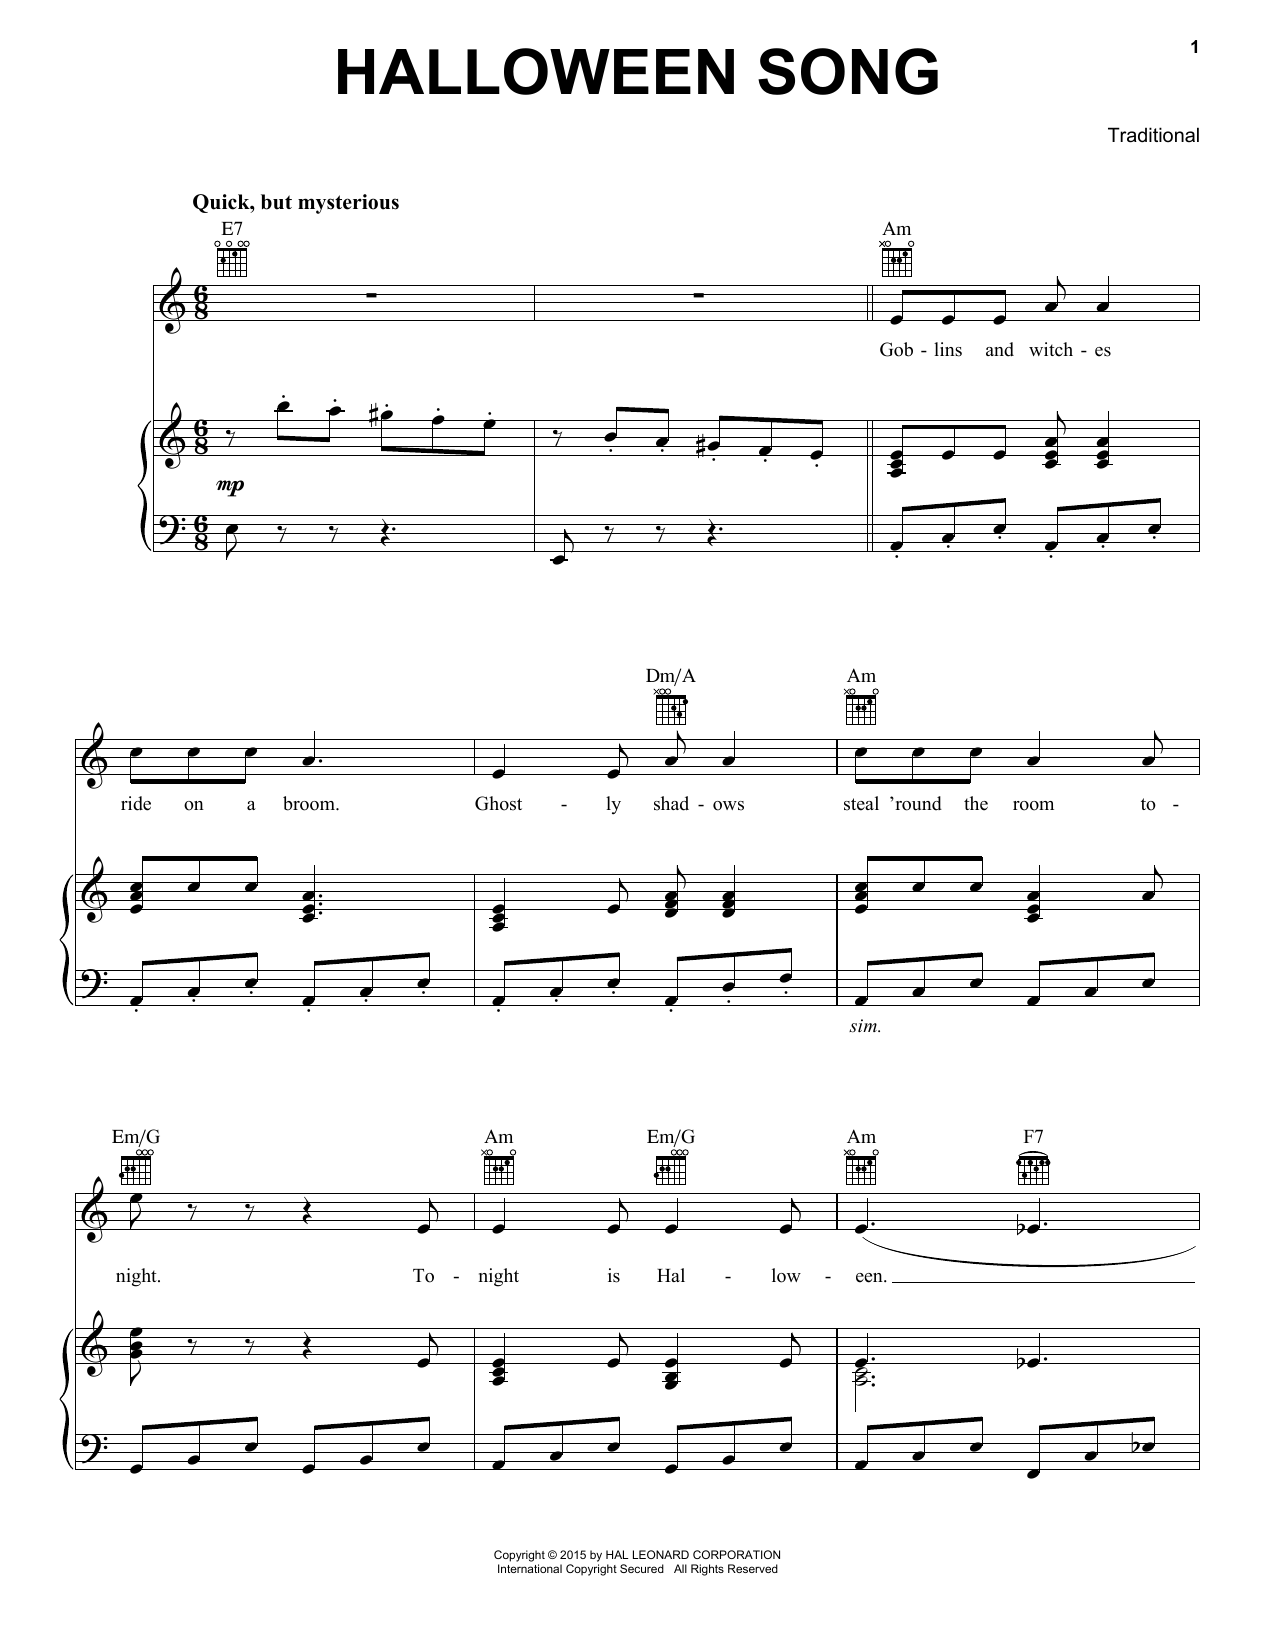 Download Traditional Halloween Song Sheet Music